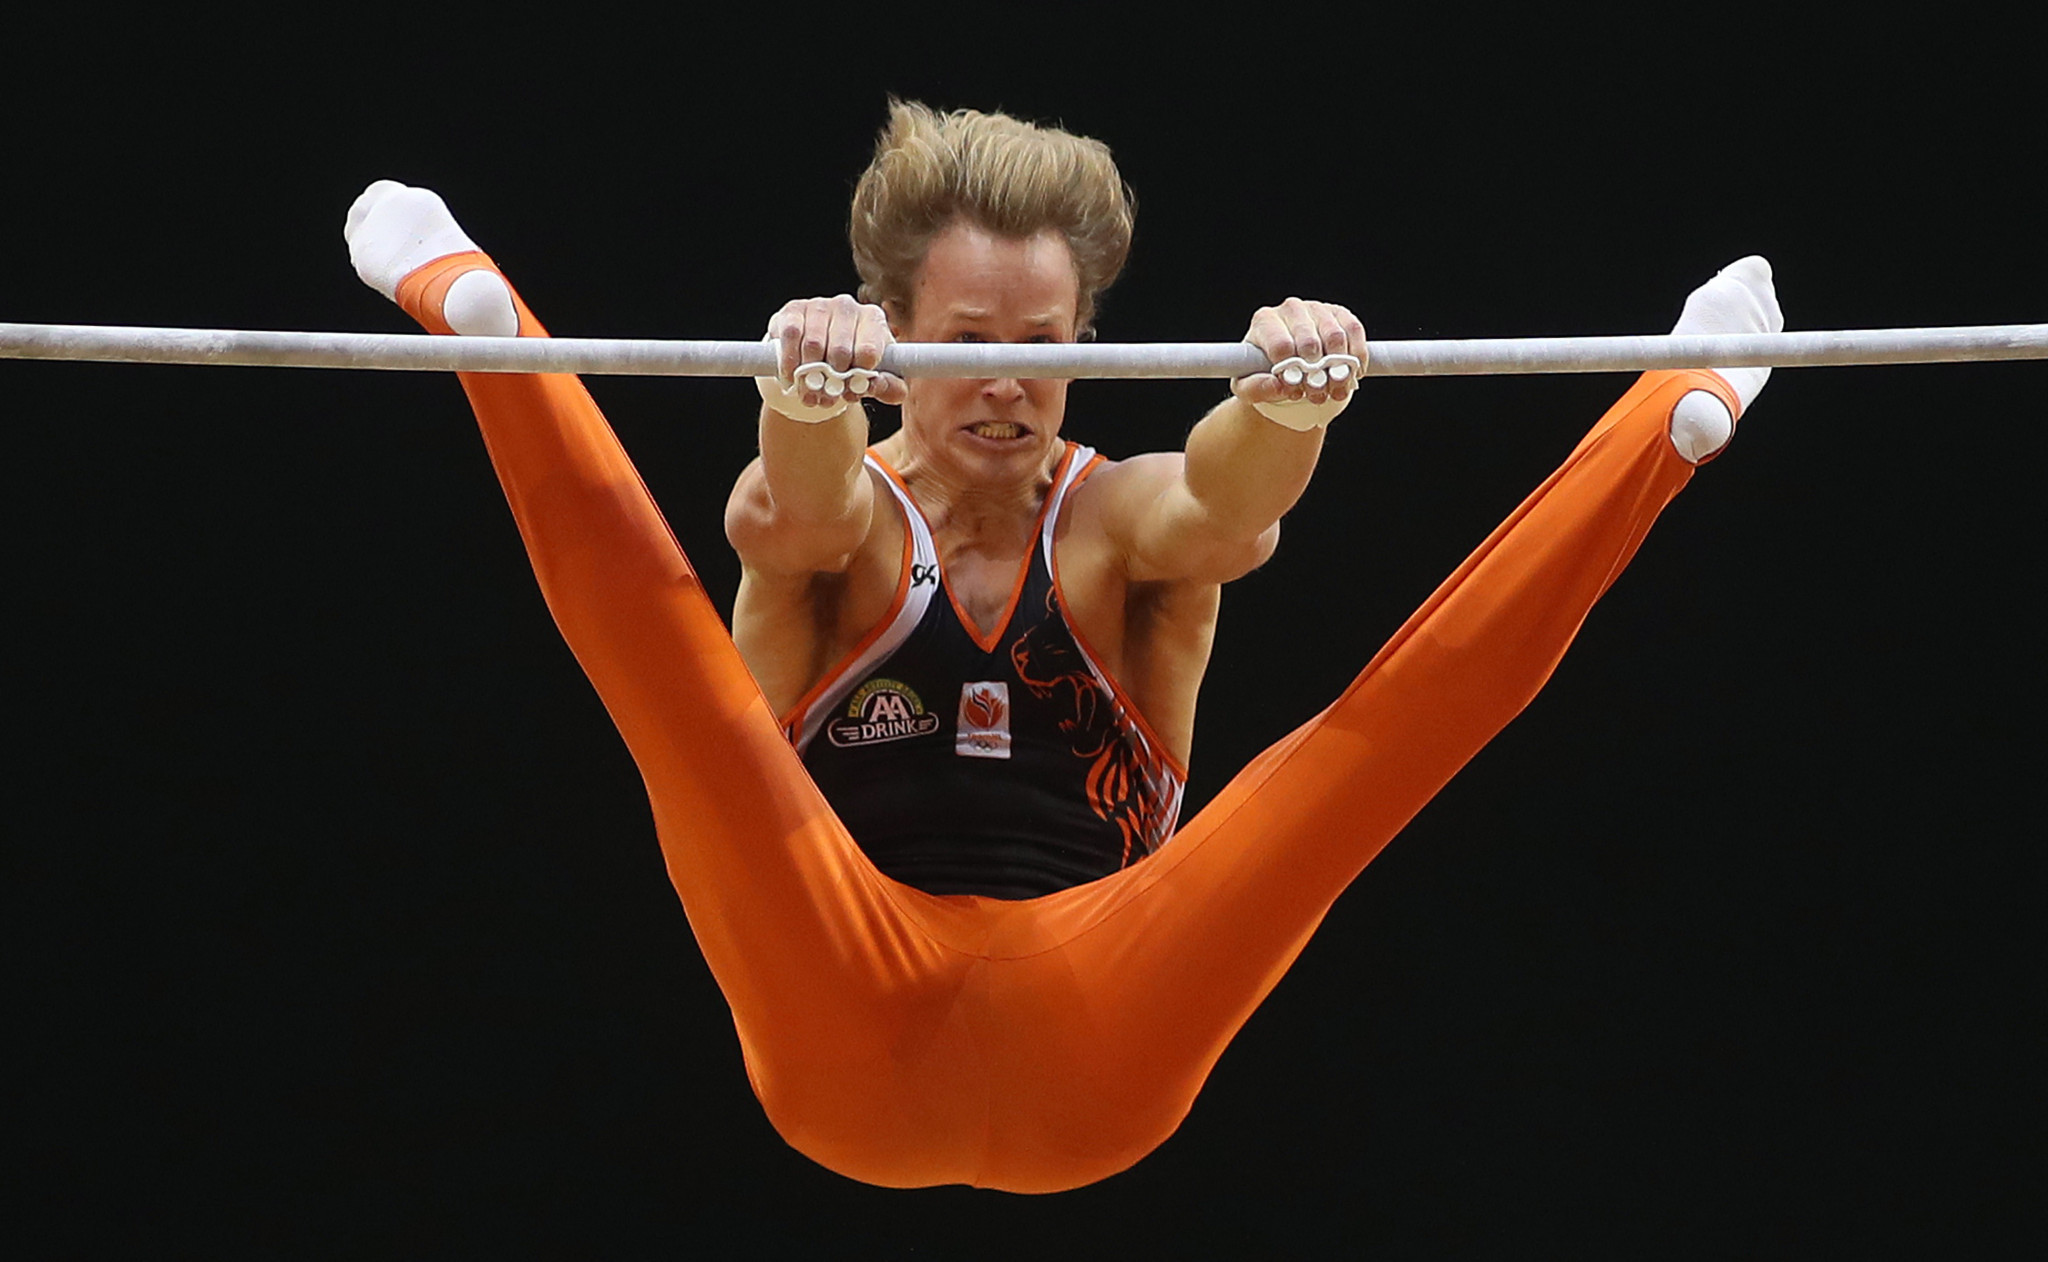 Epke Zonderland will be among those to watch in Baku ©Getty Images